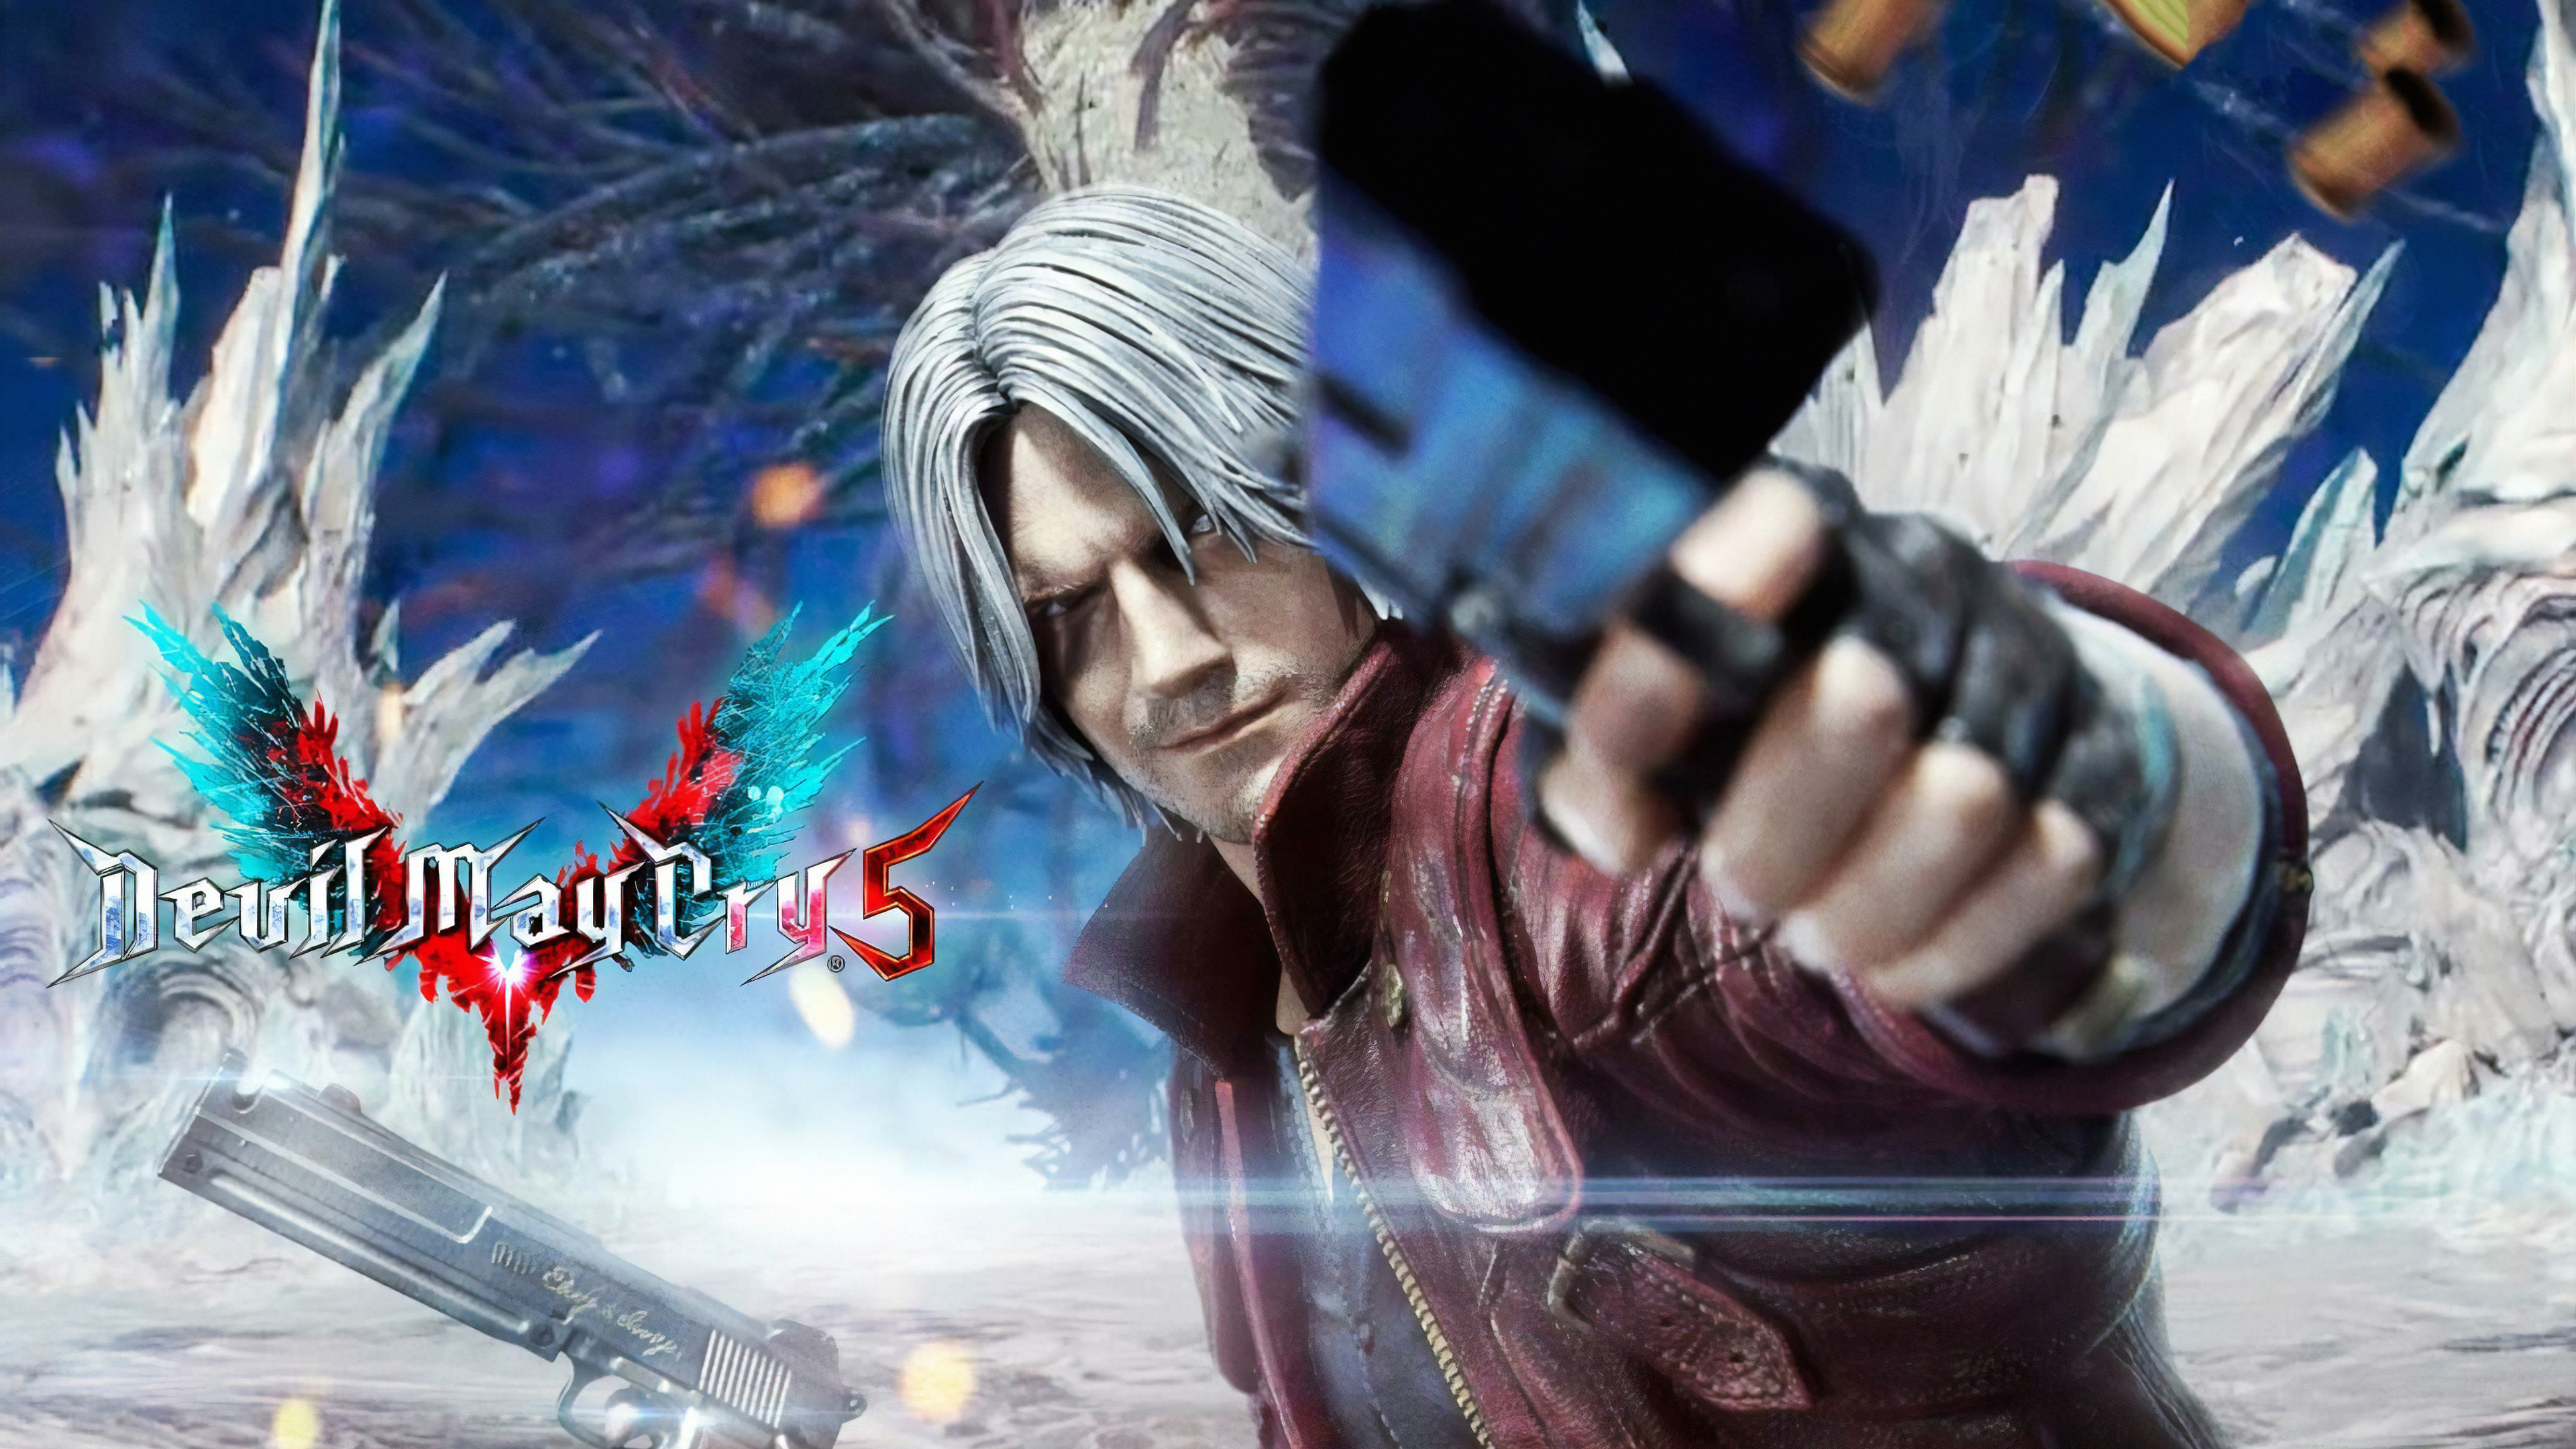 Wallpaper ID 70481  devil may cry 5 2020 games games hd 4k free  download